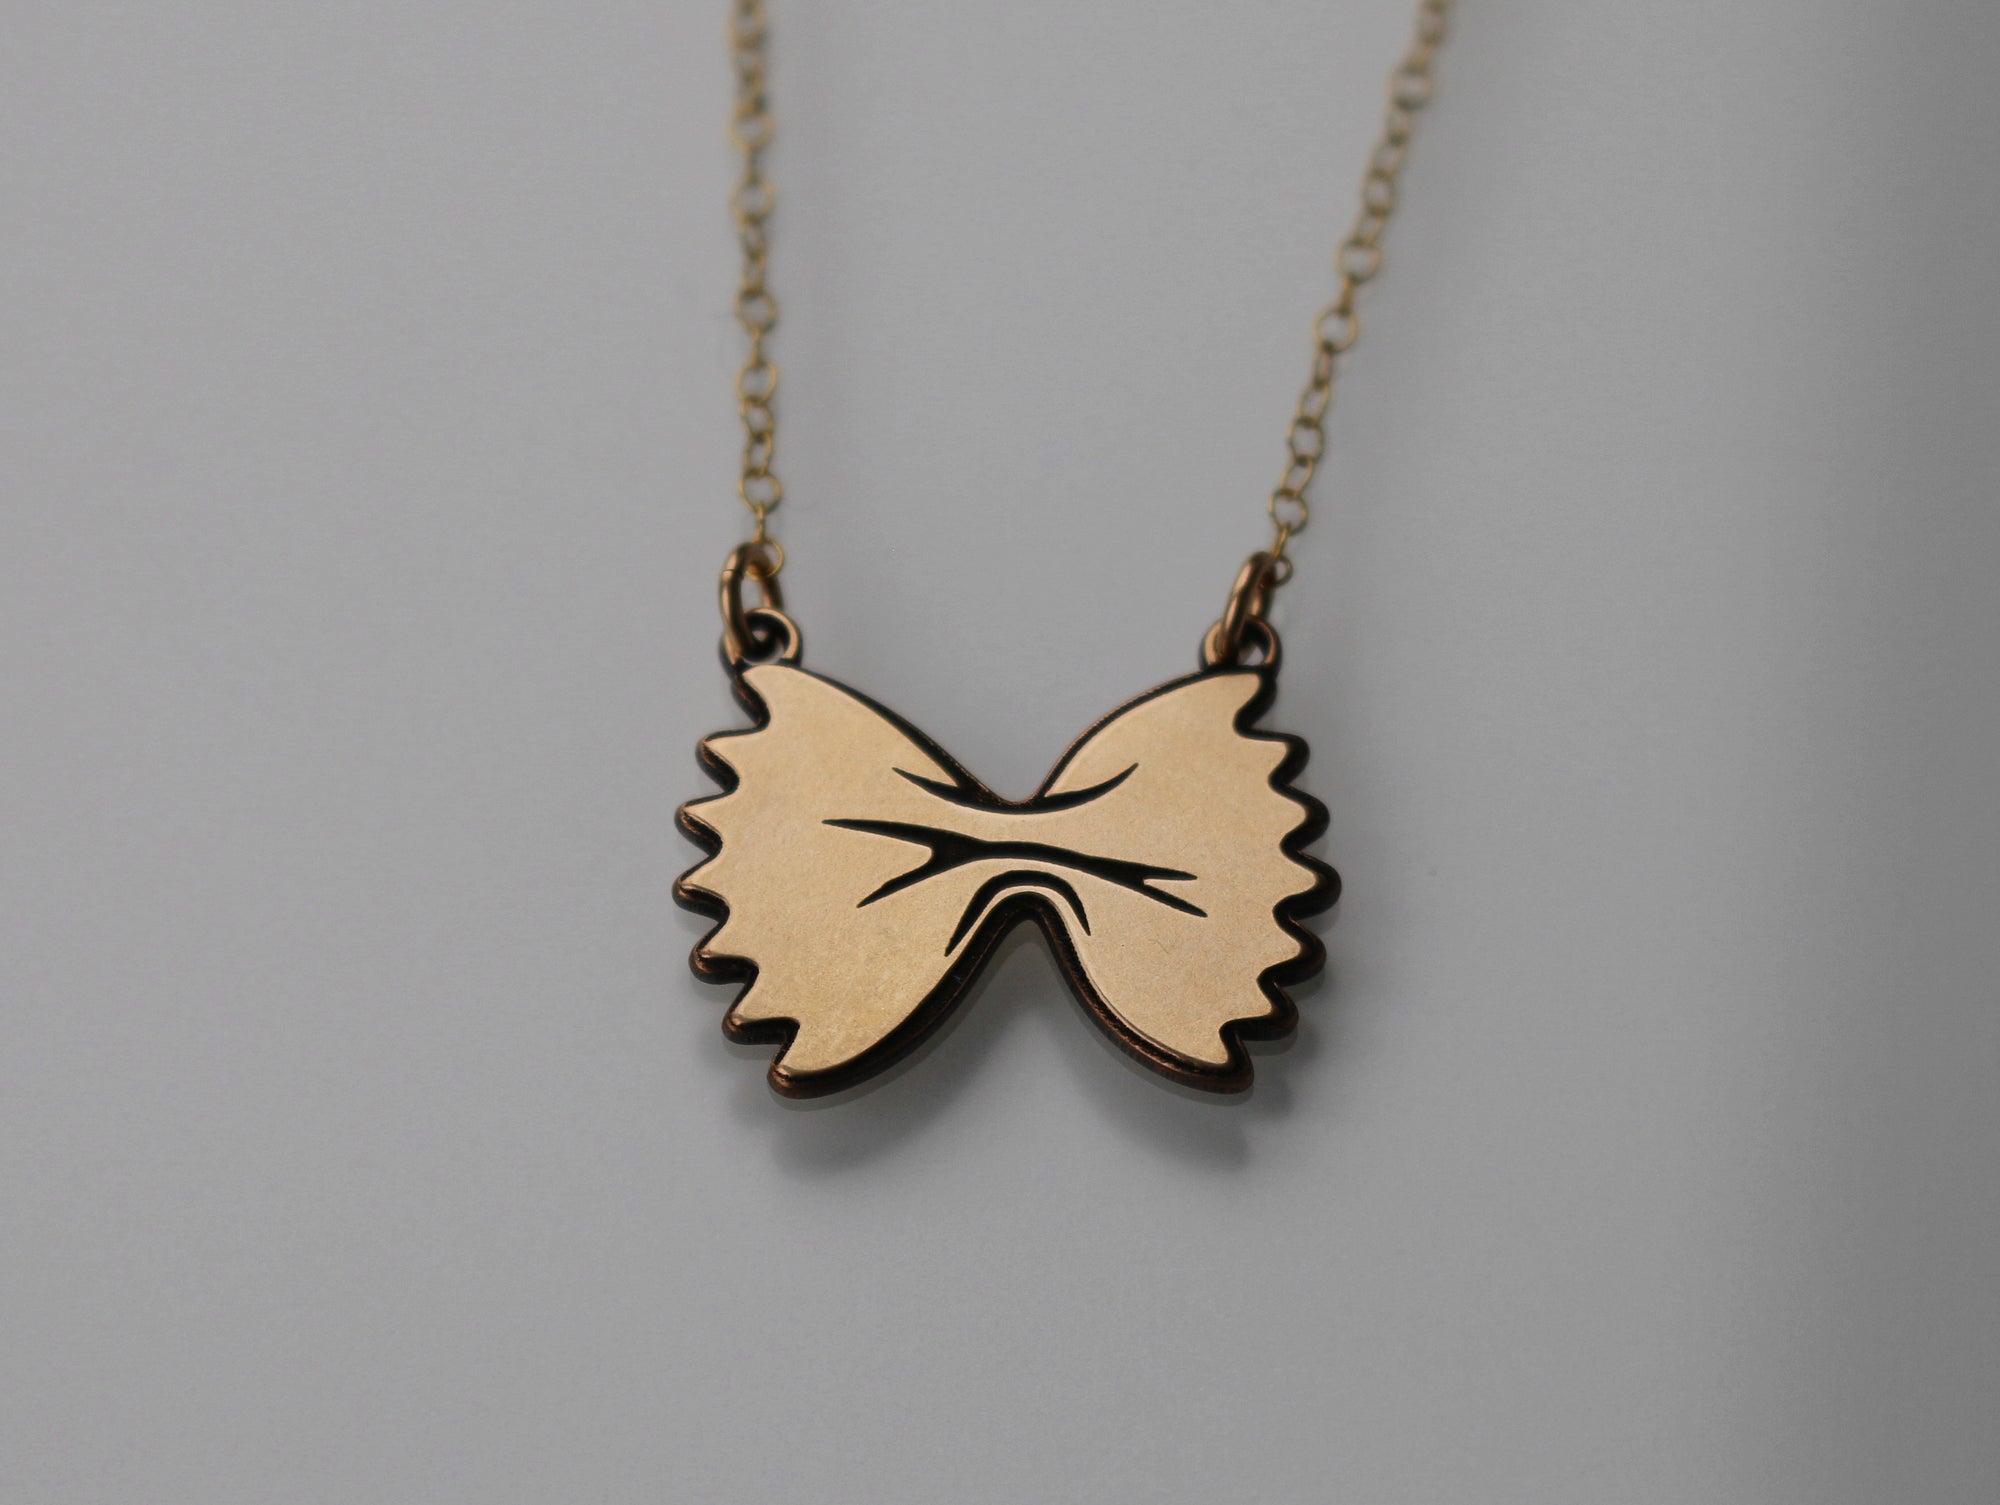 Bow Tie Pasta Necklace - Gold Filled